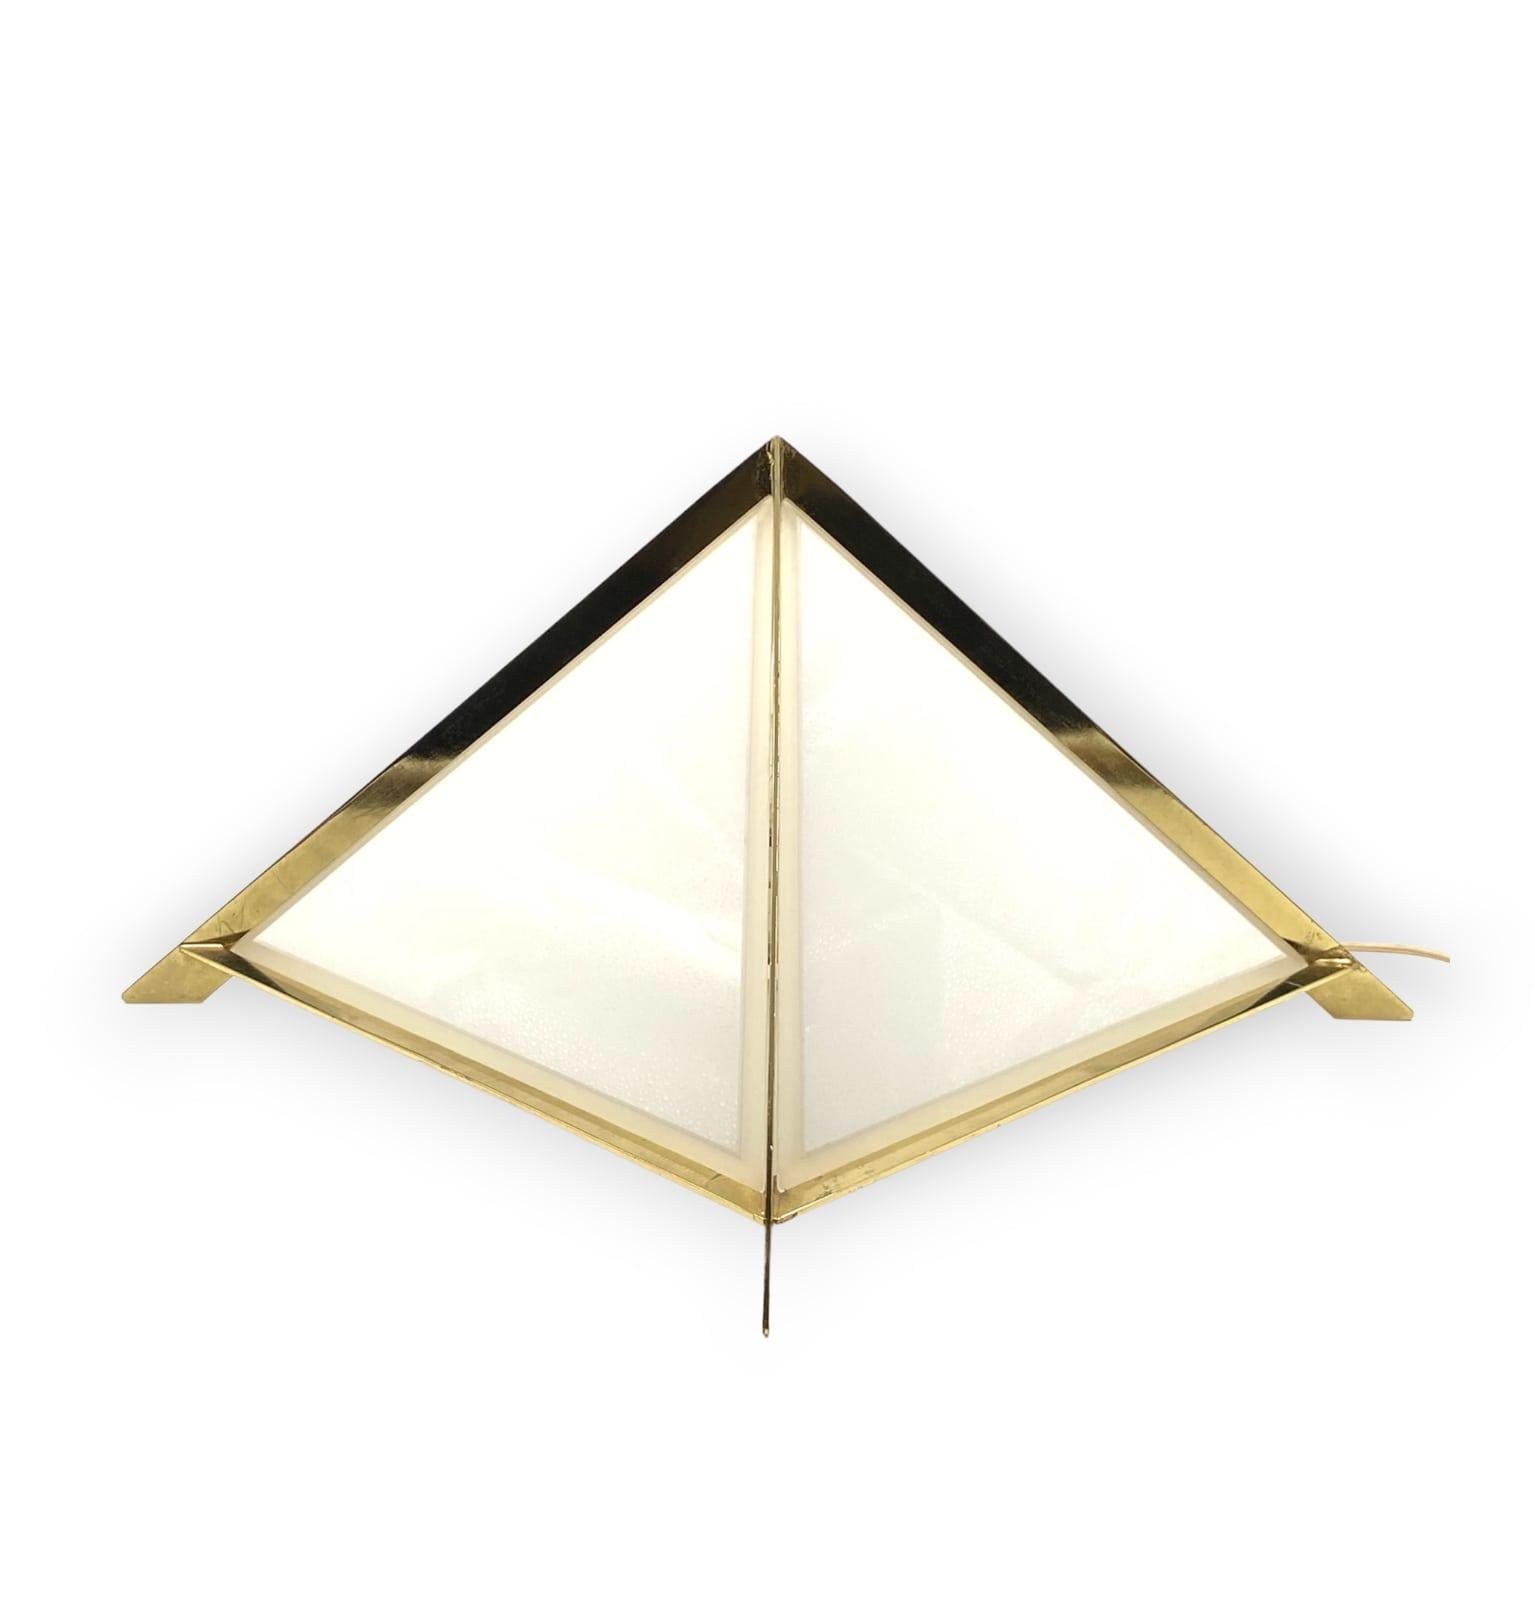 Golden Brass Pyramidal Table Lamp, Christos, Italy, 1970 For Sale 11